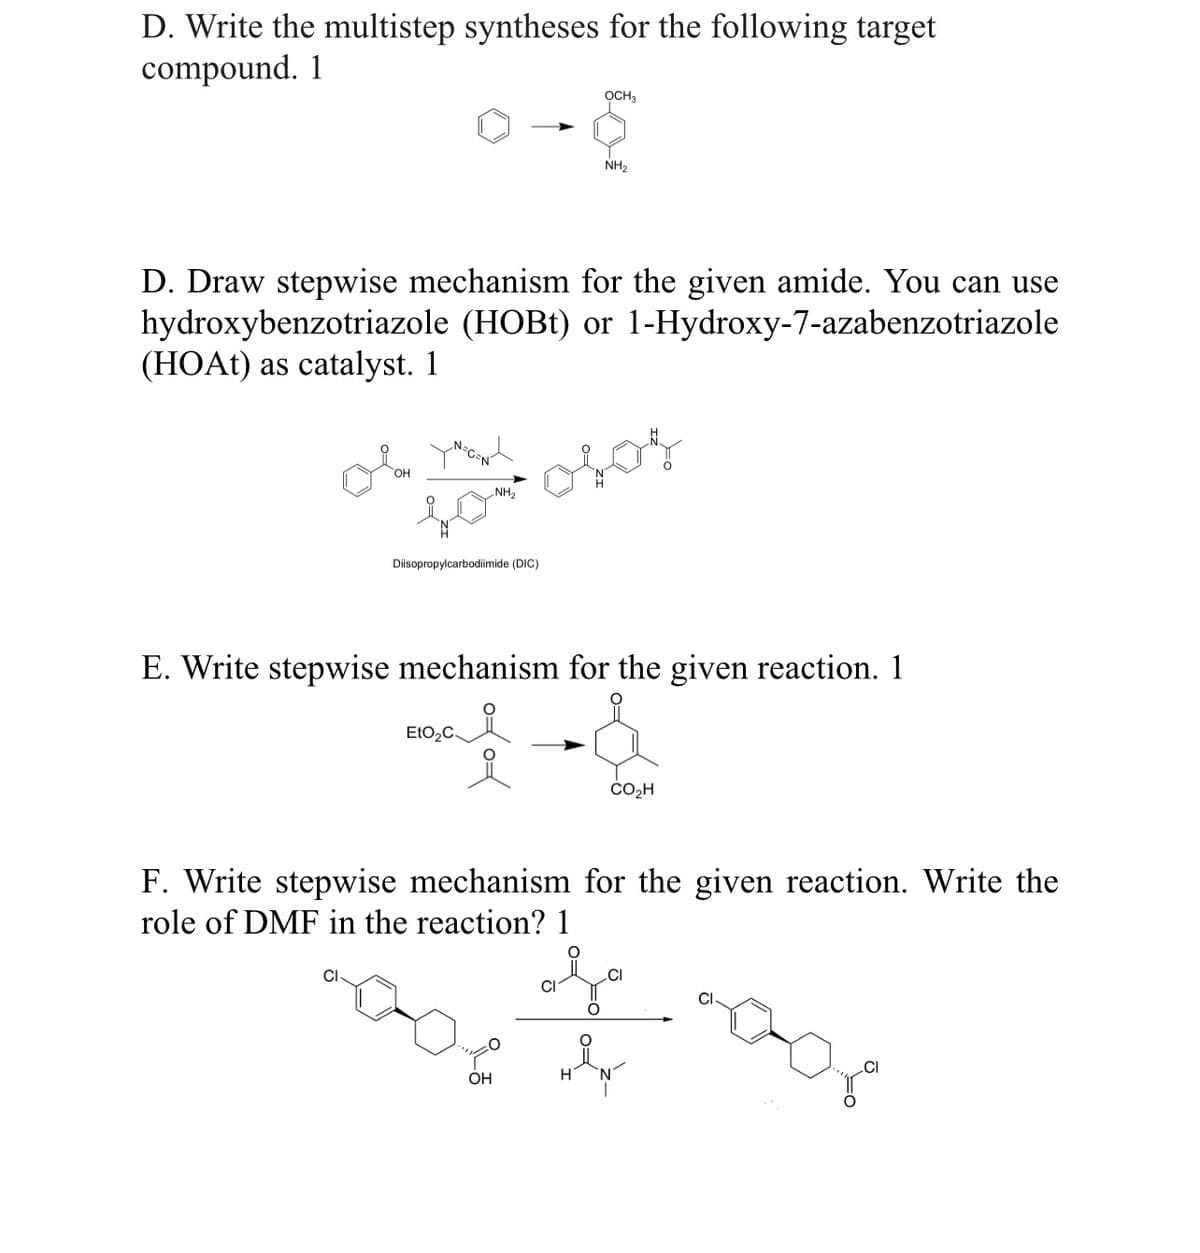 D. Write the multistep syntheses for the following target
compound. 1
D. Draw stepwise mechanism for the given amide. You can use
hydroxybenzotriazole (HOBt) or 1-Hydroxy-7-azabenzotriazole
(HOAt) as catalyst. 1
NH₂
olan yan
to otor
Diisopropylcarbodiimide (DIC)
EtO₂C-
OCH3
E. Write stepwise mechanism for the given reaction. 1
NH₂
ook
OH
F. Write stepwise mechanism for the given reaction. Write the
role of DMF in the reaction? 1
CI
CO₂H
CI
HÅN
CI